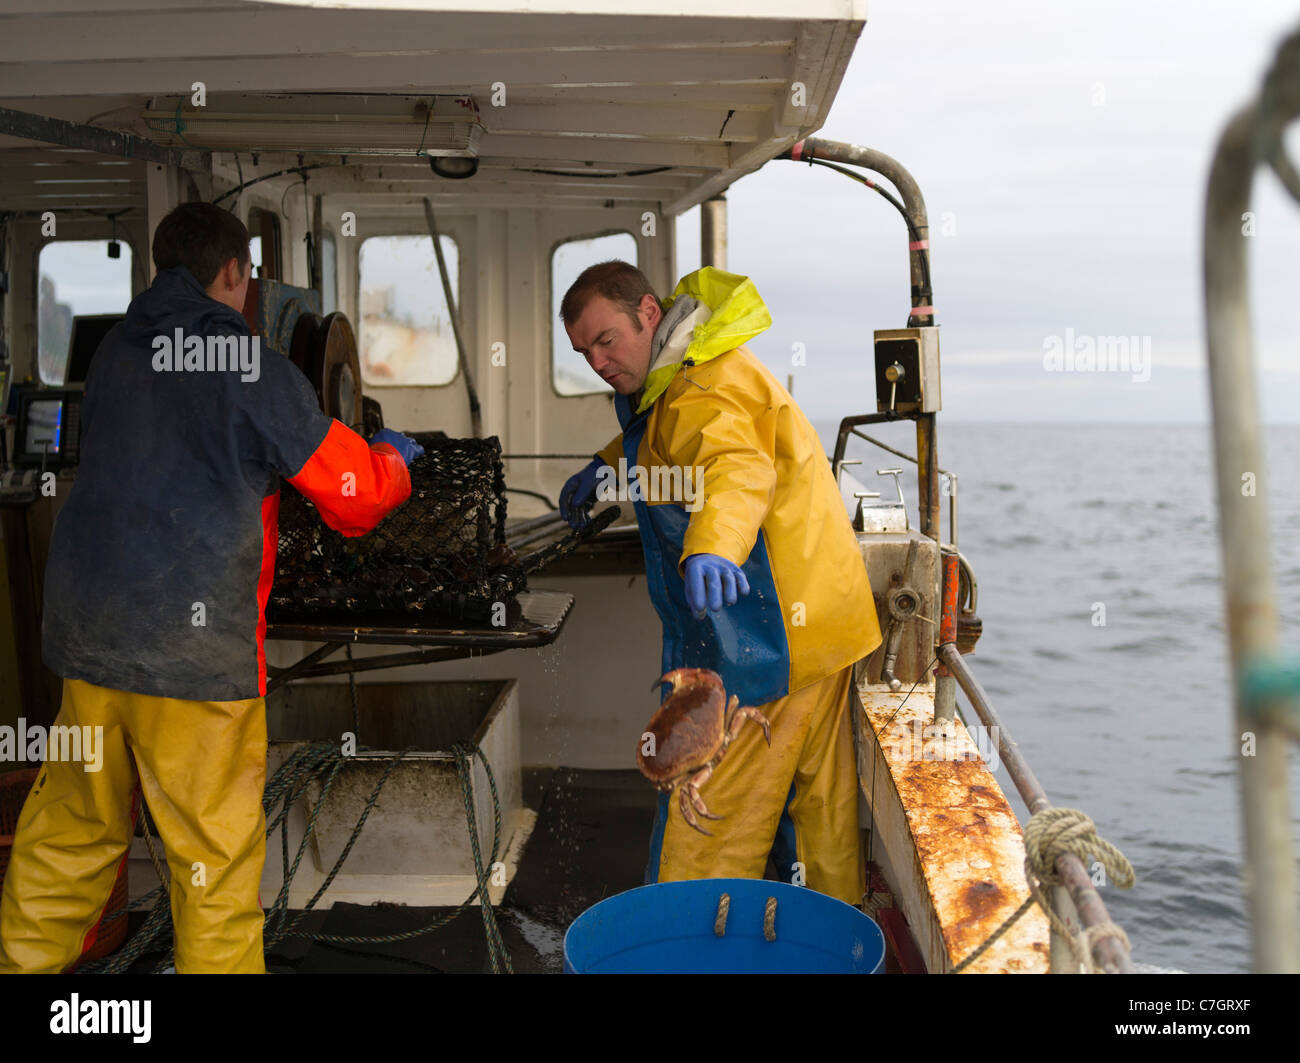 dh Lobster Fishermen FISHING BOAT ORKNEY SCOTLAND Selecting crab from creel aboard local fisherman uk Stock Photo